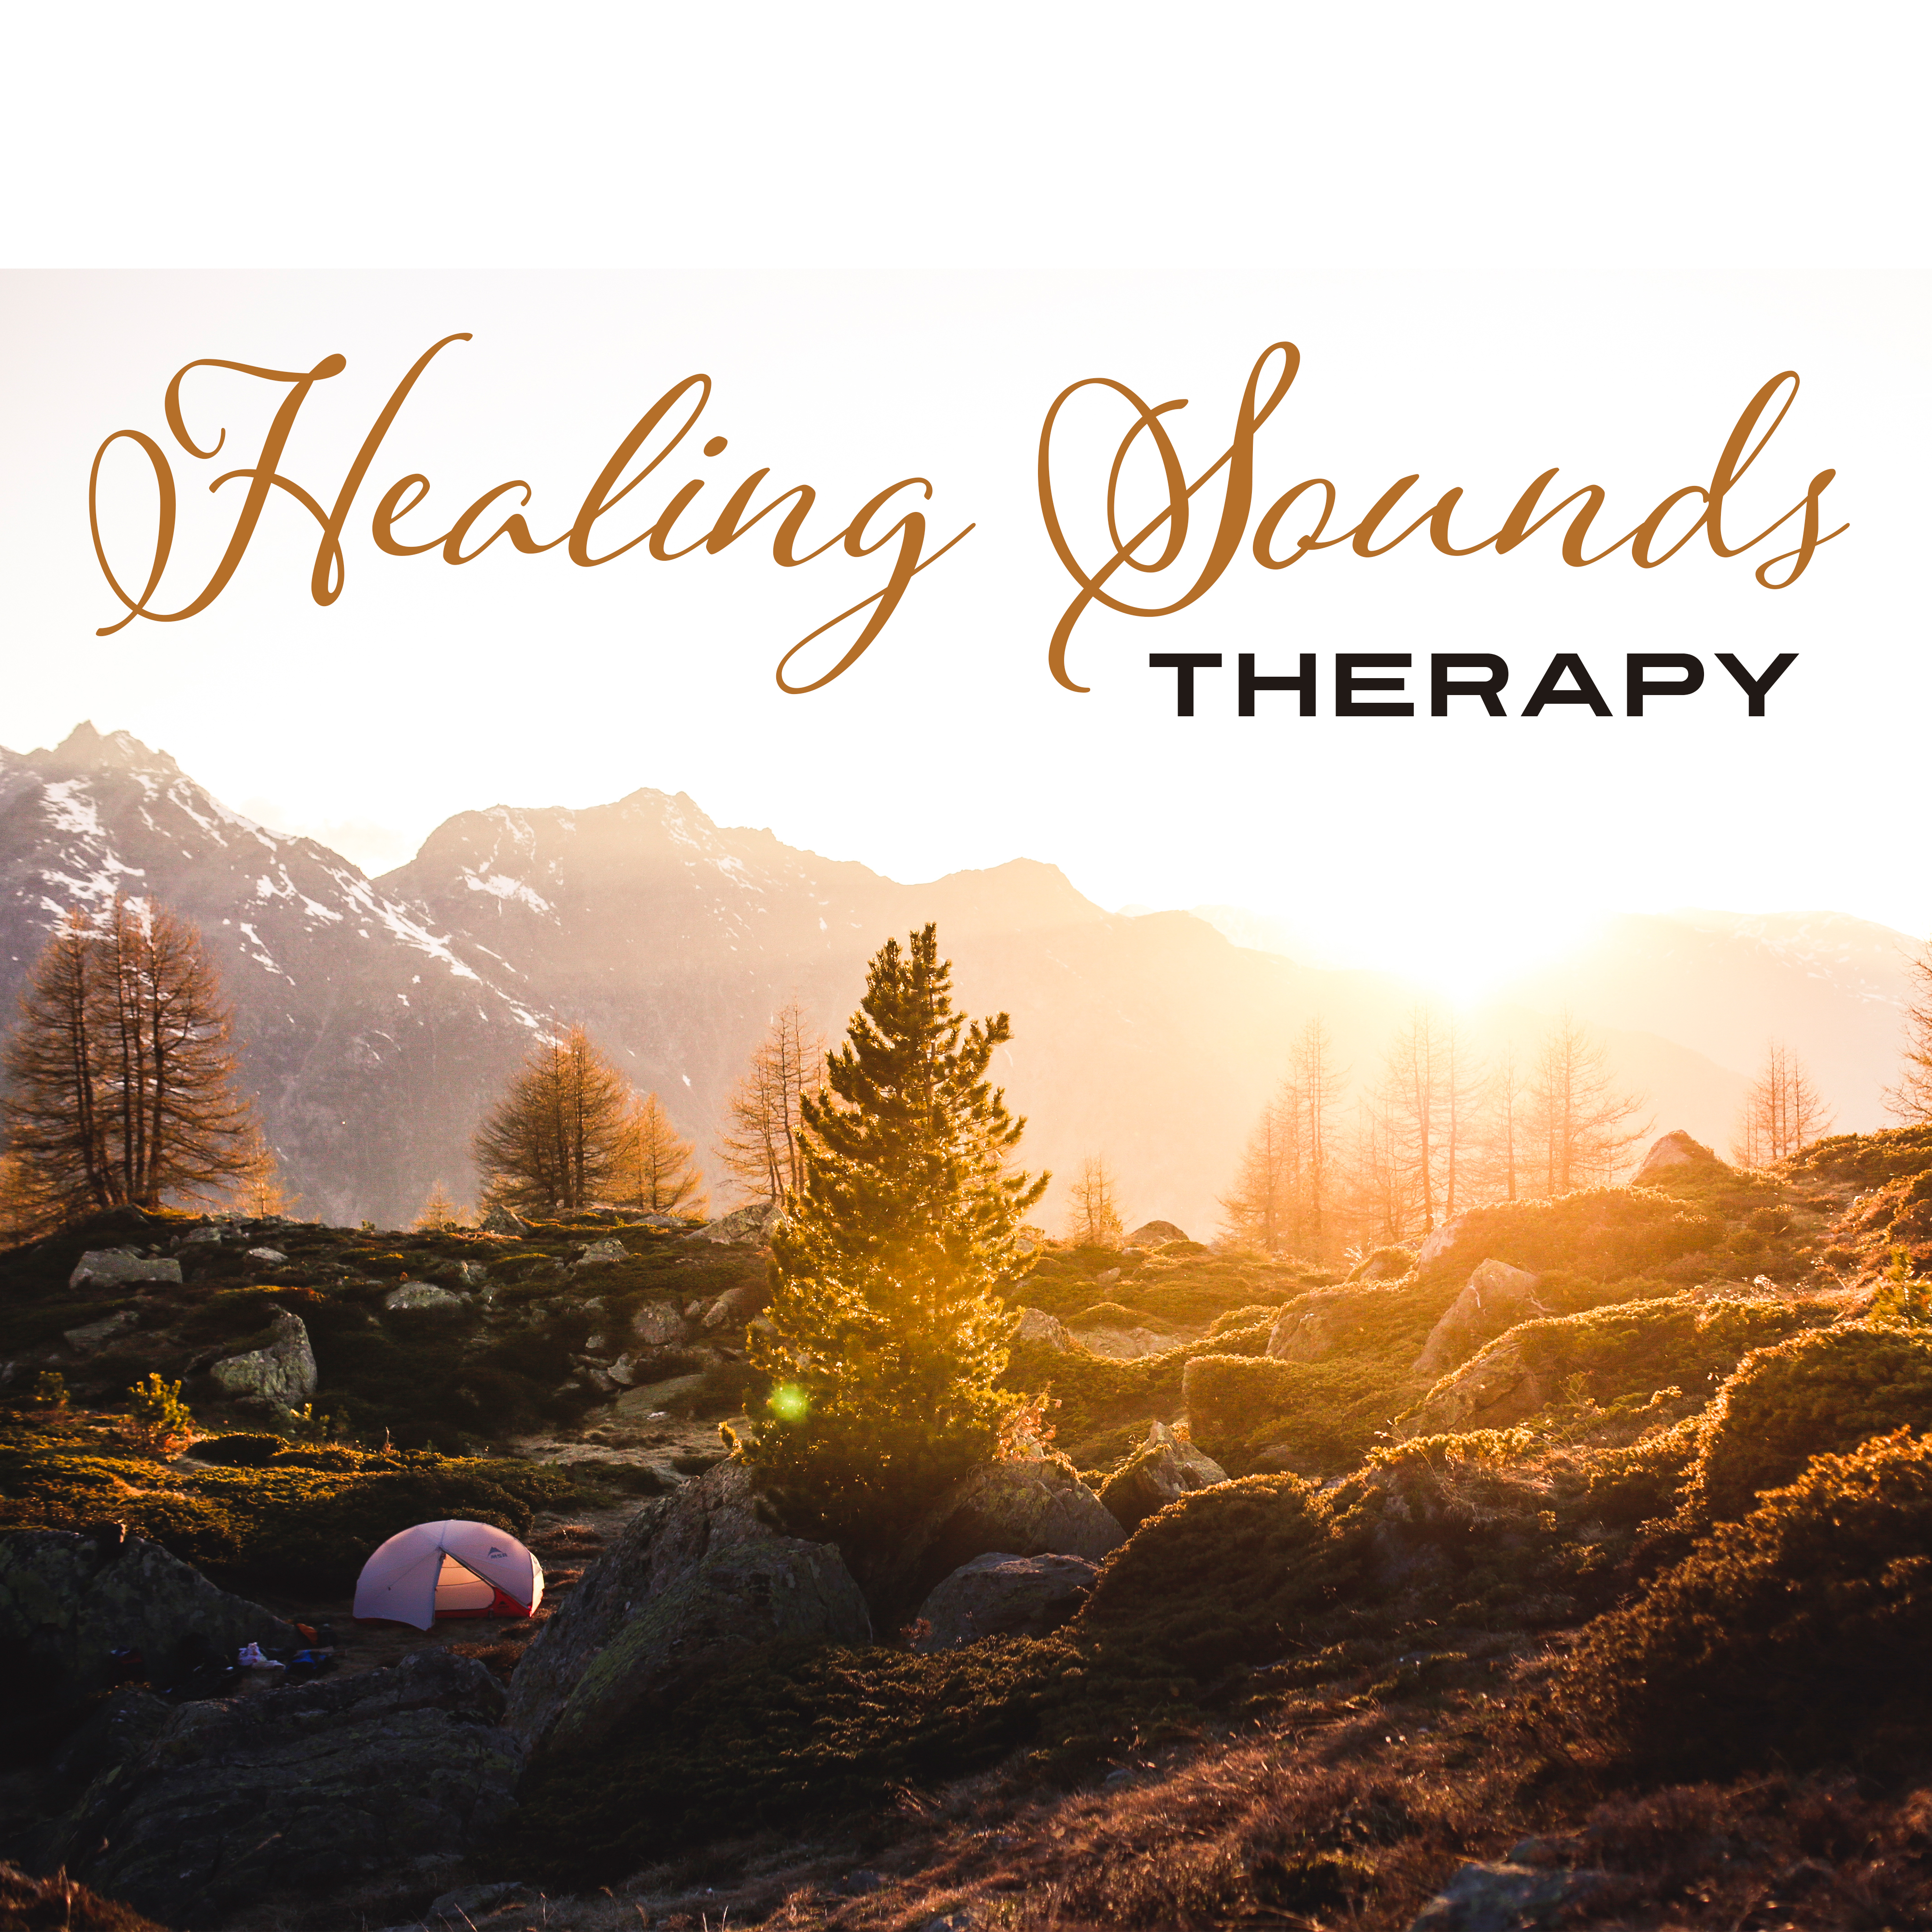 Healing Sounds Therapy – Relaxing Music, Peaceful Sounds of Nature, Rest, Relief Stress, New Age 2017